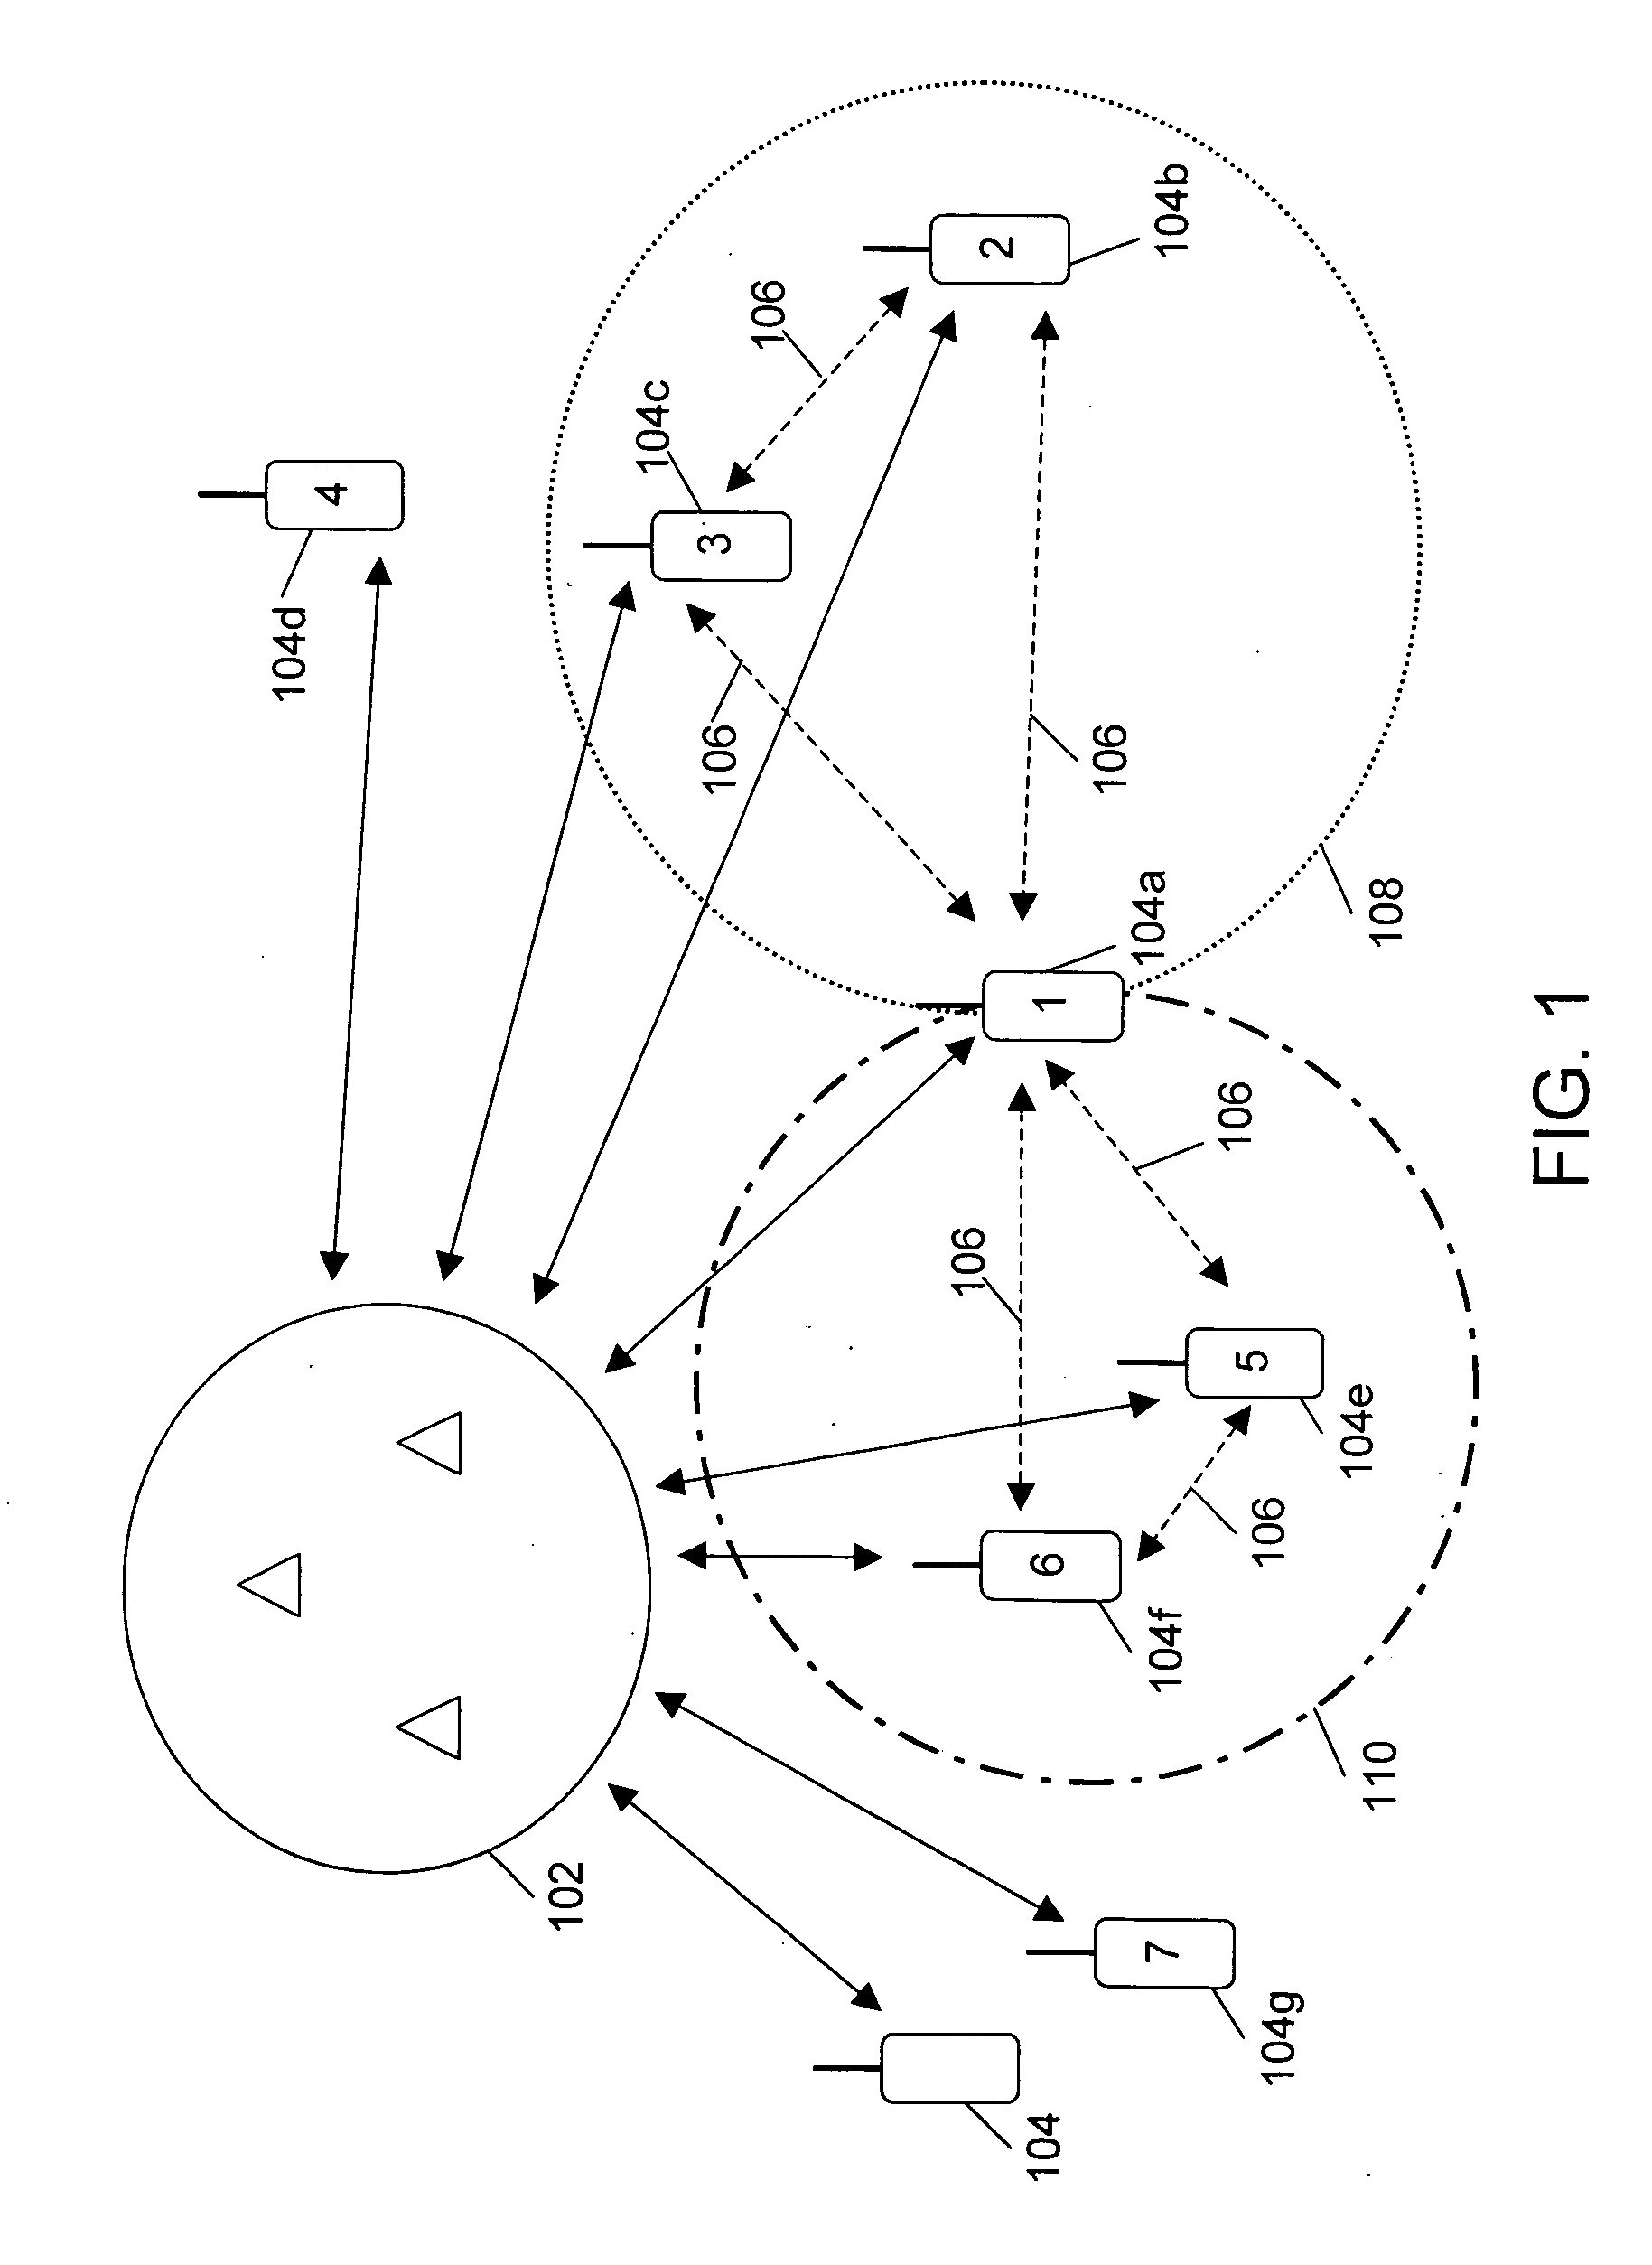 Method and system for multiple-input-multiple-output (MIMO) communication in a wireless network